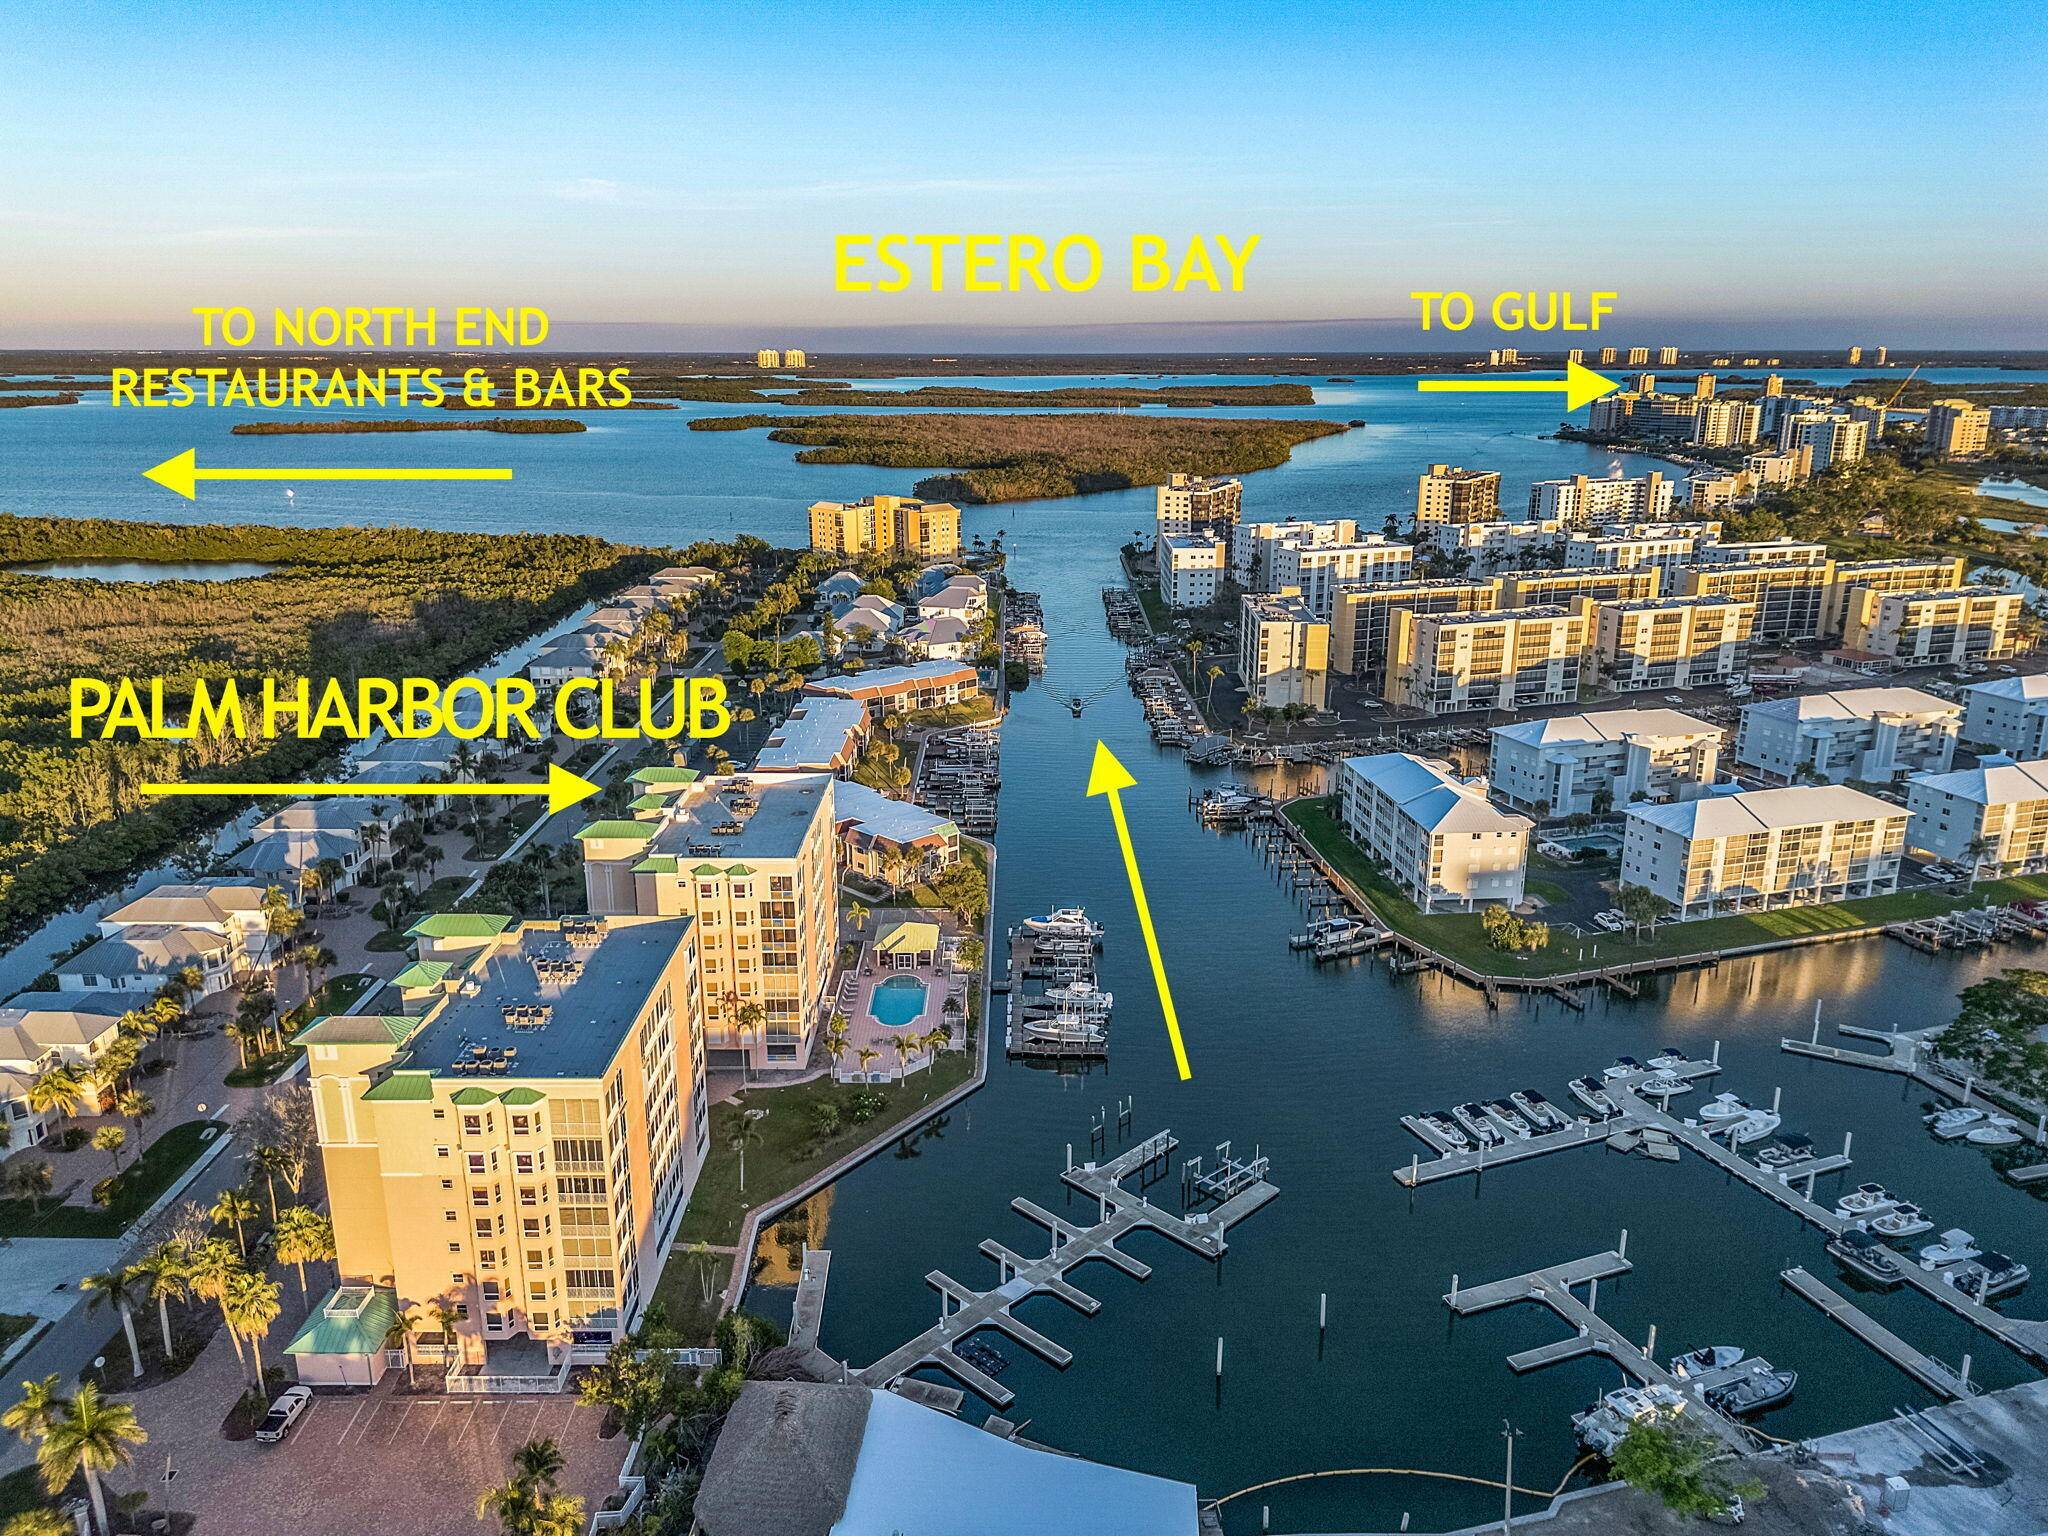 Boaters Dream Property 1031 Exchange eligible for up to 52 weekly rentals annually Investors Dream Property Condo Owners Dream Property.